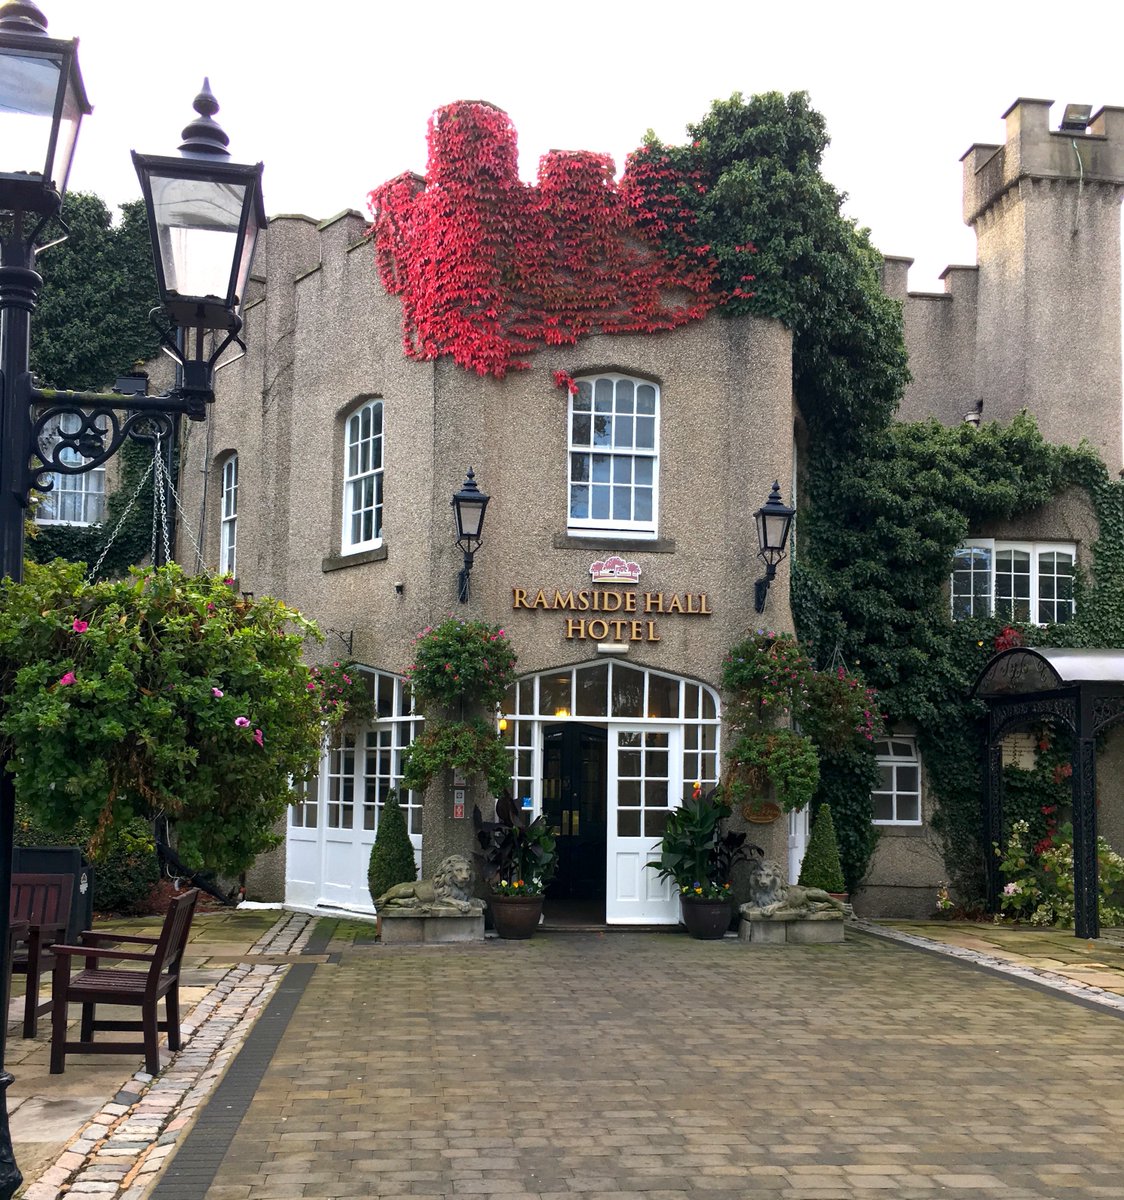 You know Christmas is coming when the ivy turns red 😍🎅🏻 From Christmas Party Nights, Family Christmas Shows and Festive Dining, we've got loads going on this winter! 🎉 Find out more here: ramsidehallhotel.co.uk/christmas #NEfollowers #NorthEastHour #CountyDurham